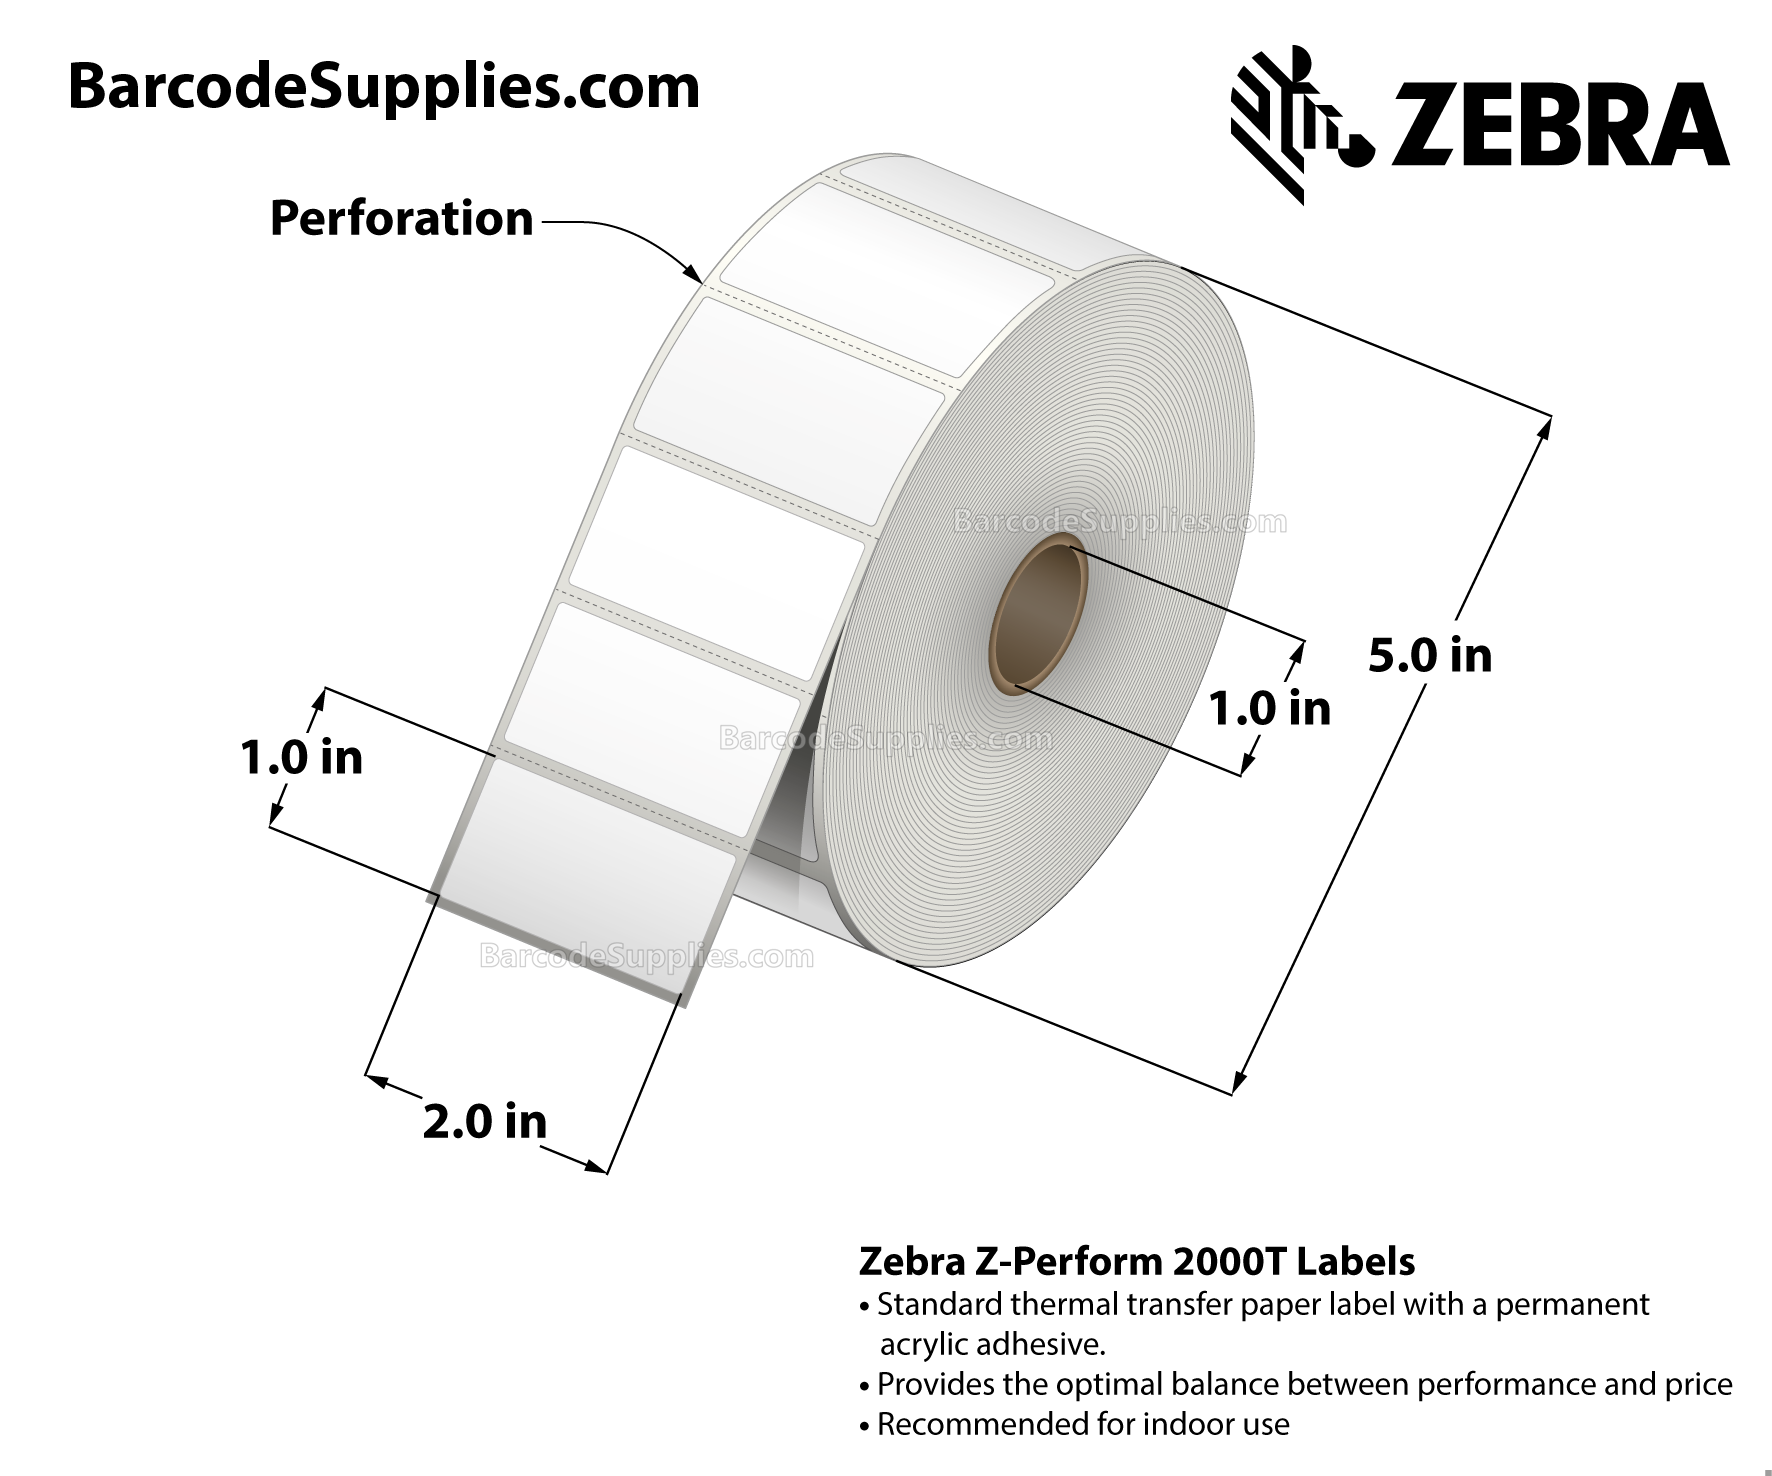 2 x 1 Thermal Transfer White Z-Perform 2000T Labels With Permanent Adhesive - Perforated - 2490 Labels Per Roll - Carton Of 6 Rolls - 14940 Labels Total - MPN: 10005850